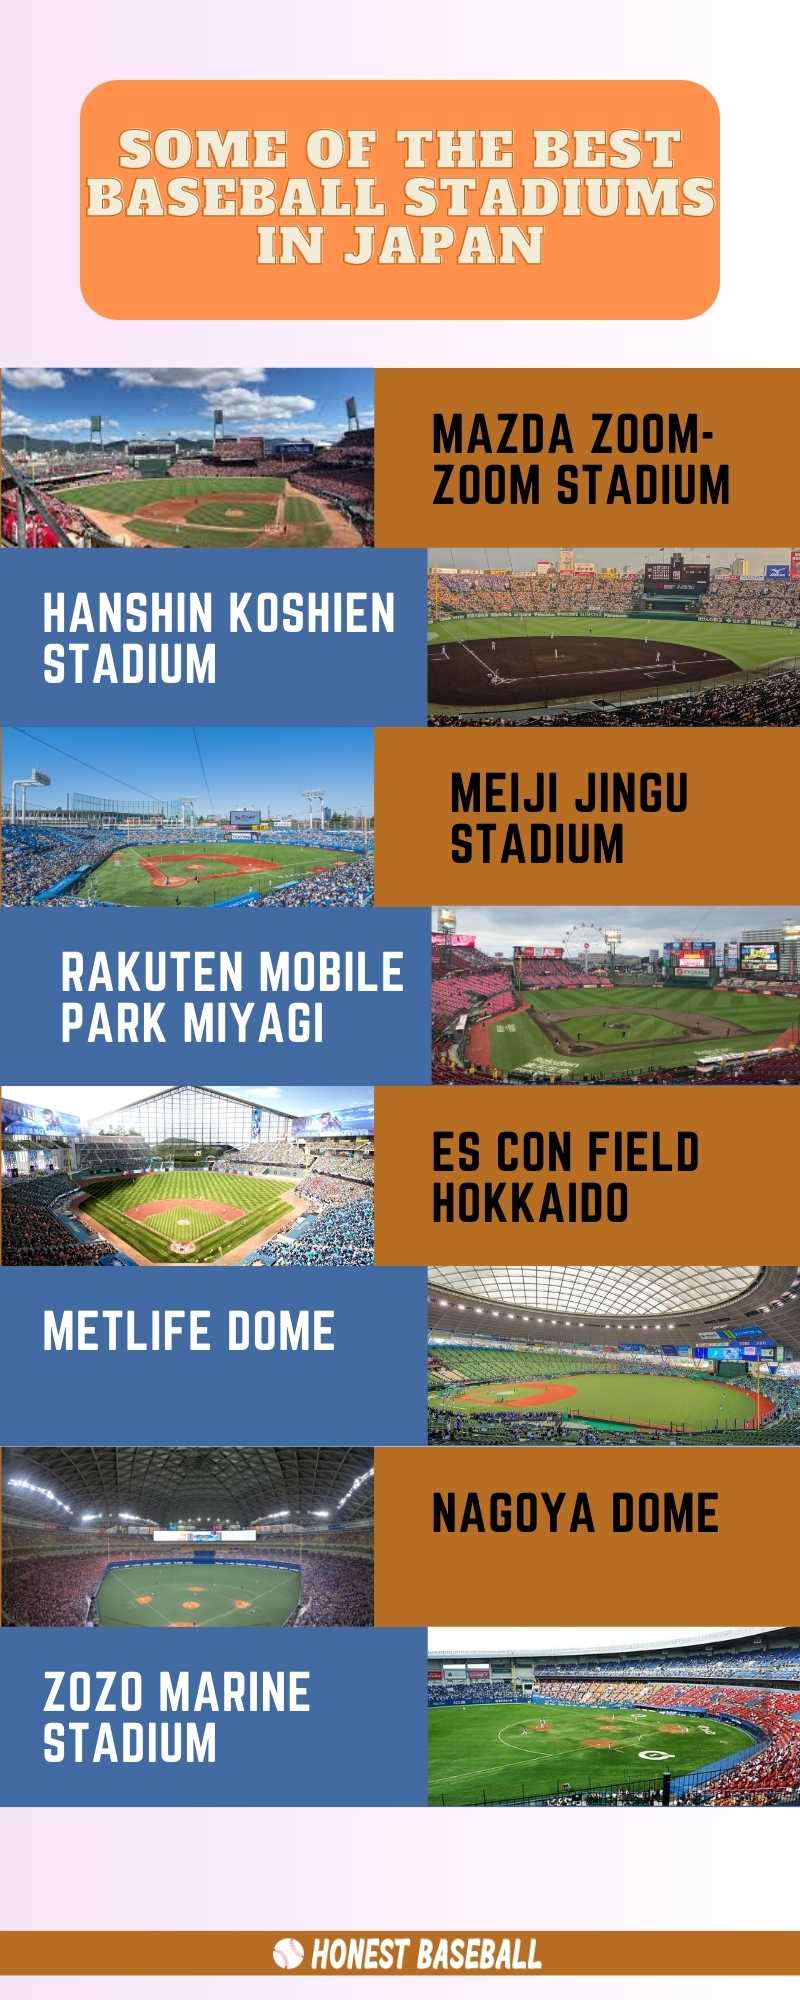 Some of the Best Baseball Stadiums in Japan